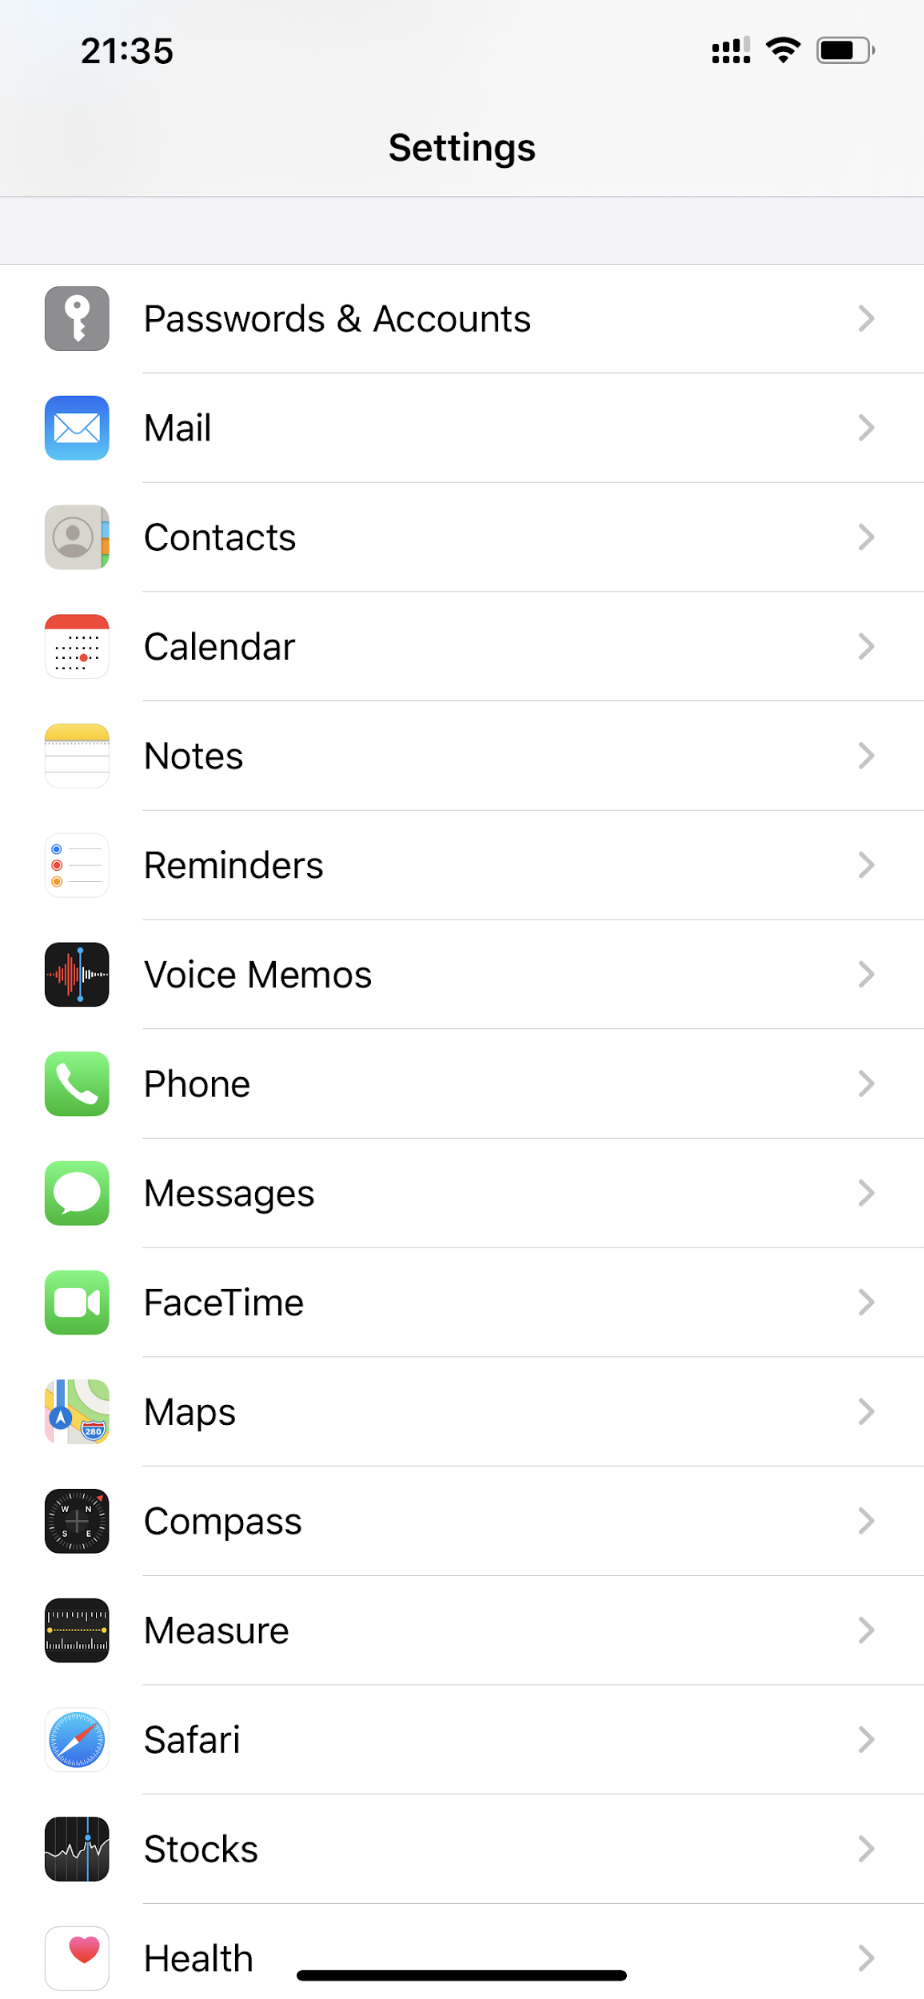 Go to the Settings app on your device.
Select Mail or Mail, Contacts, Calendars.